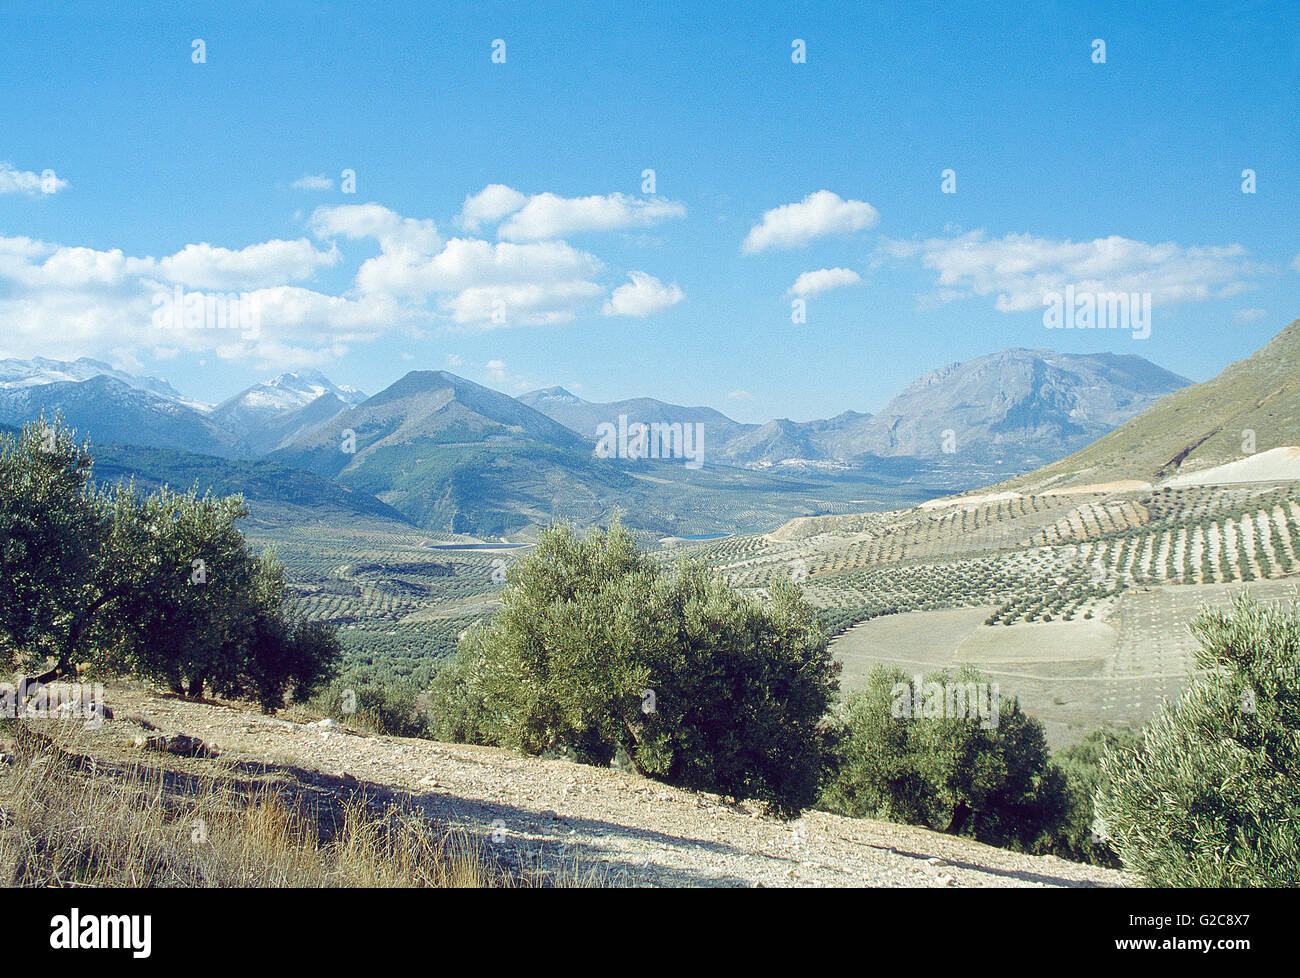 Olive groves. Sierra Magina Nature Reserve, Jaen province, Andalucia, Spain. Stock Photo